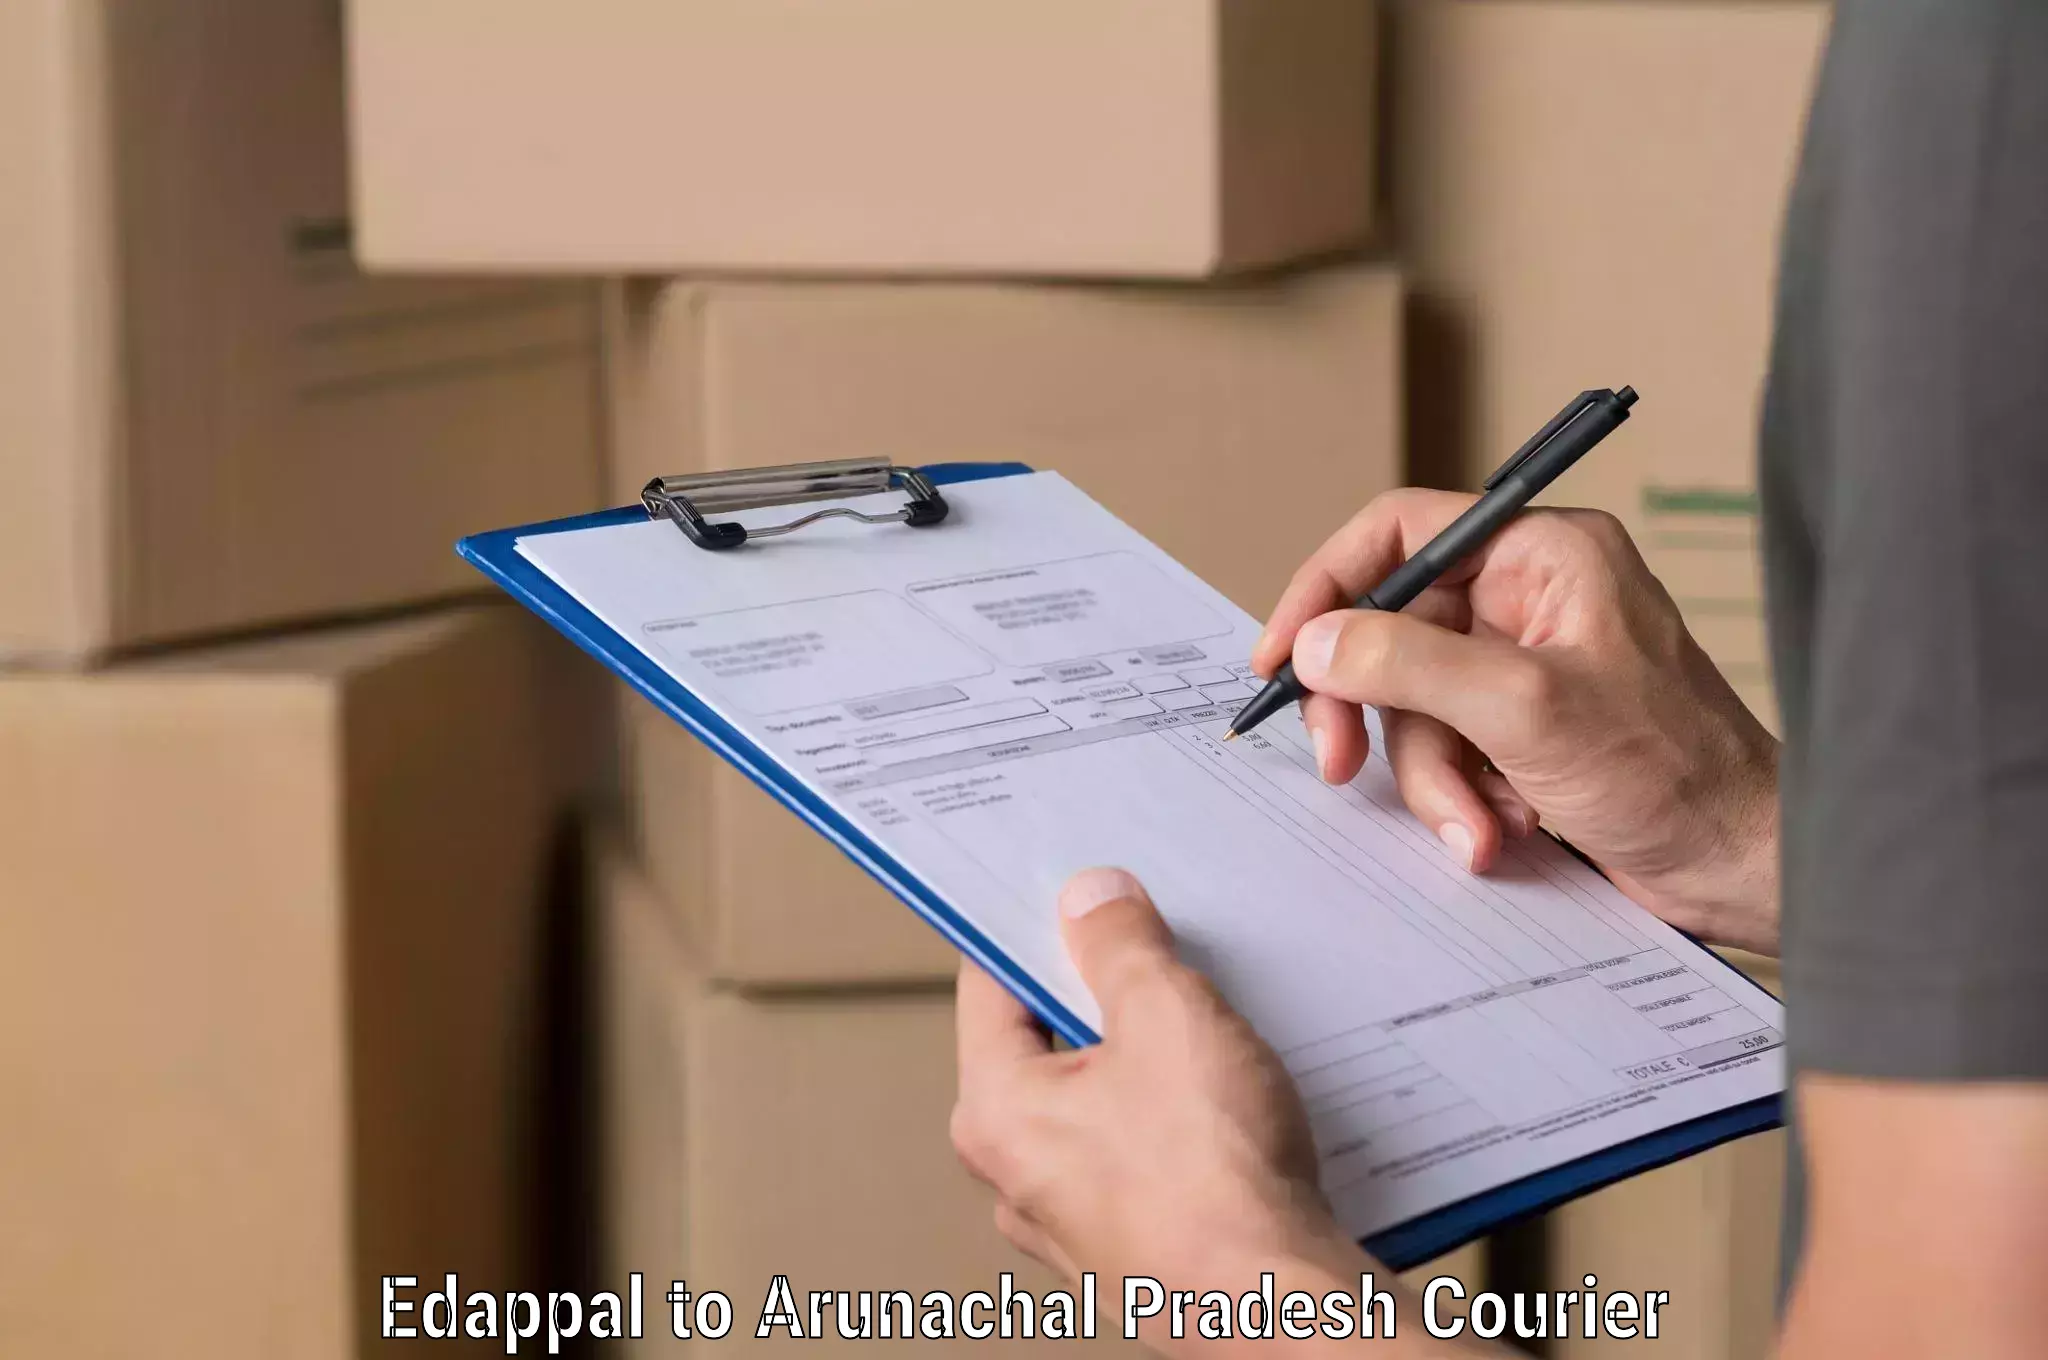 Shipping and handling Edappal to Aalo